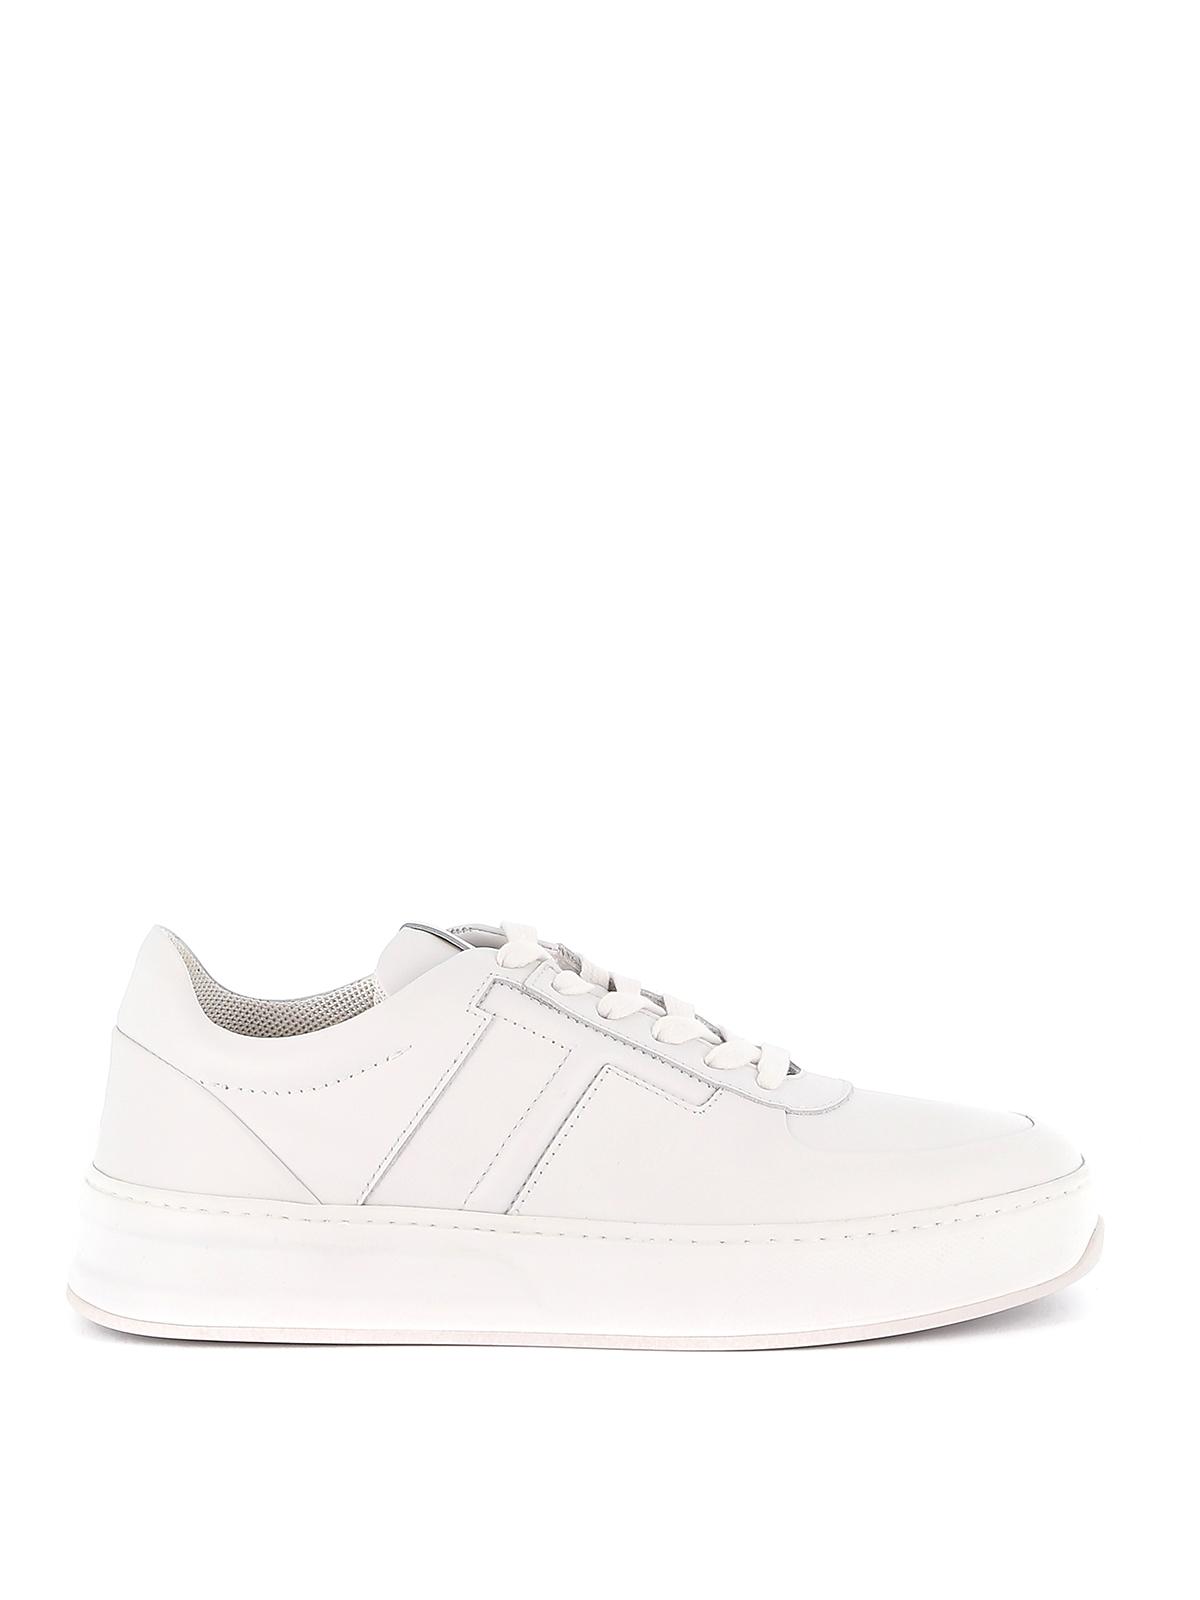 Tod's White Leather Sneakers for Men - Lyst